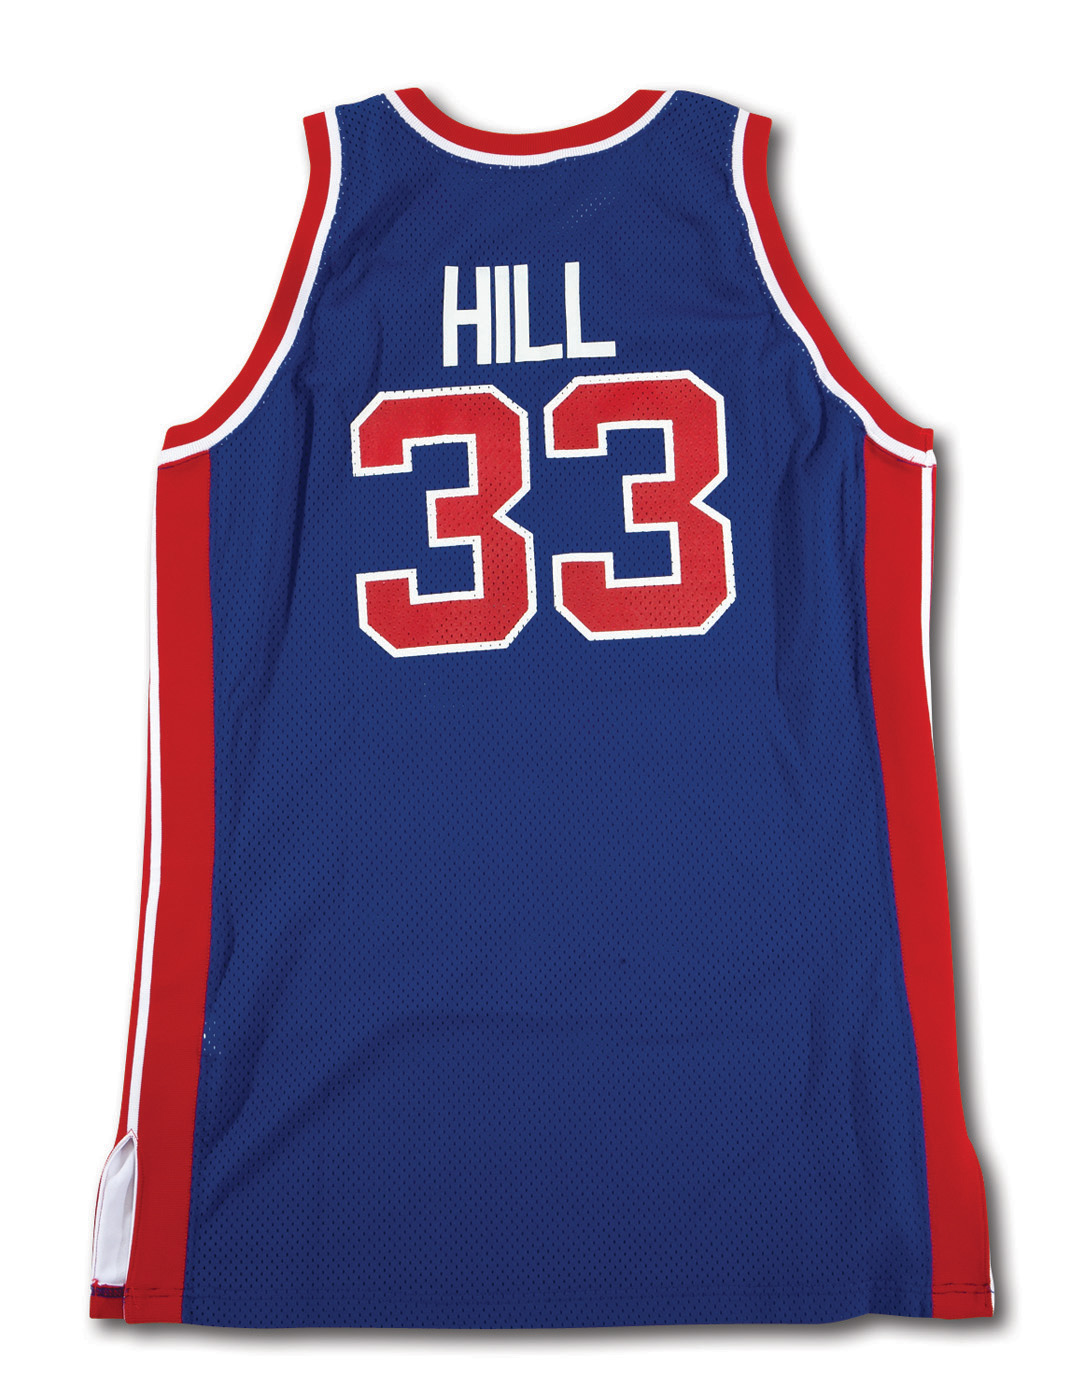 1994-95 Grant Hill Game Worn Detroit Pistons Jersey